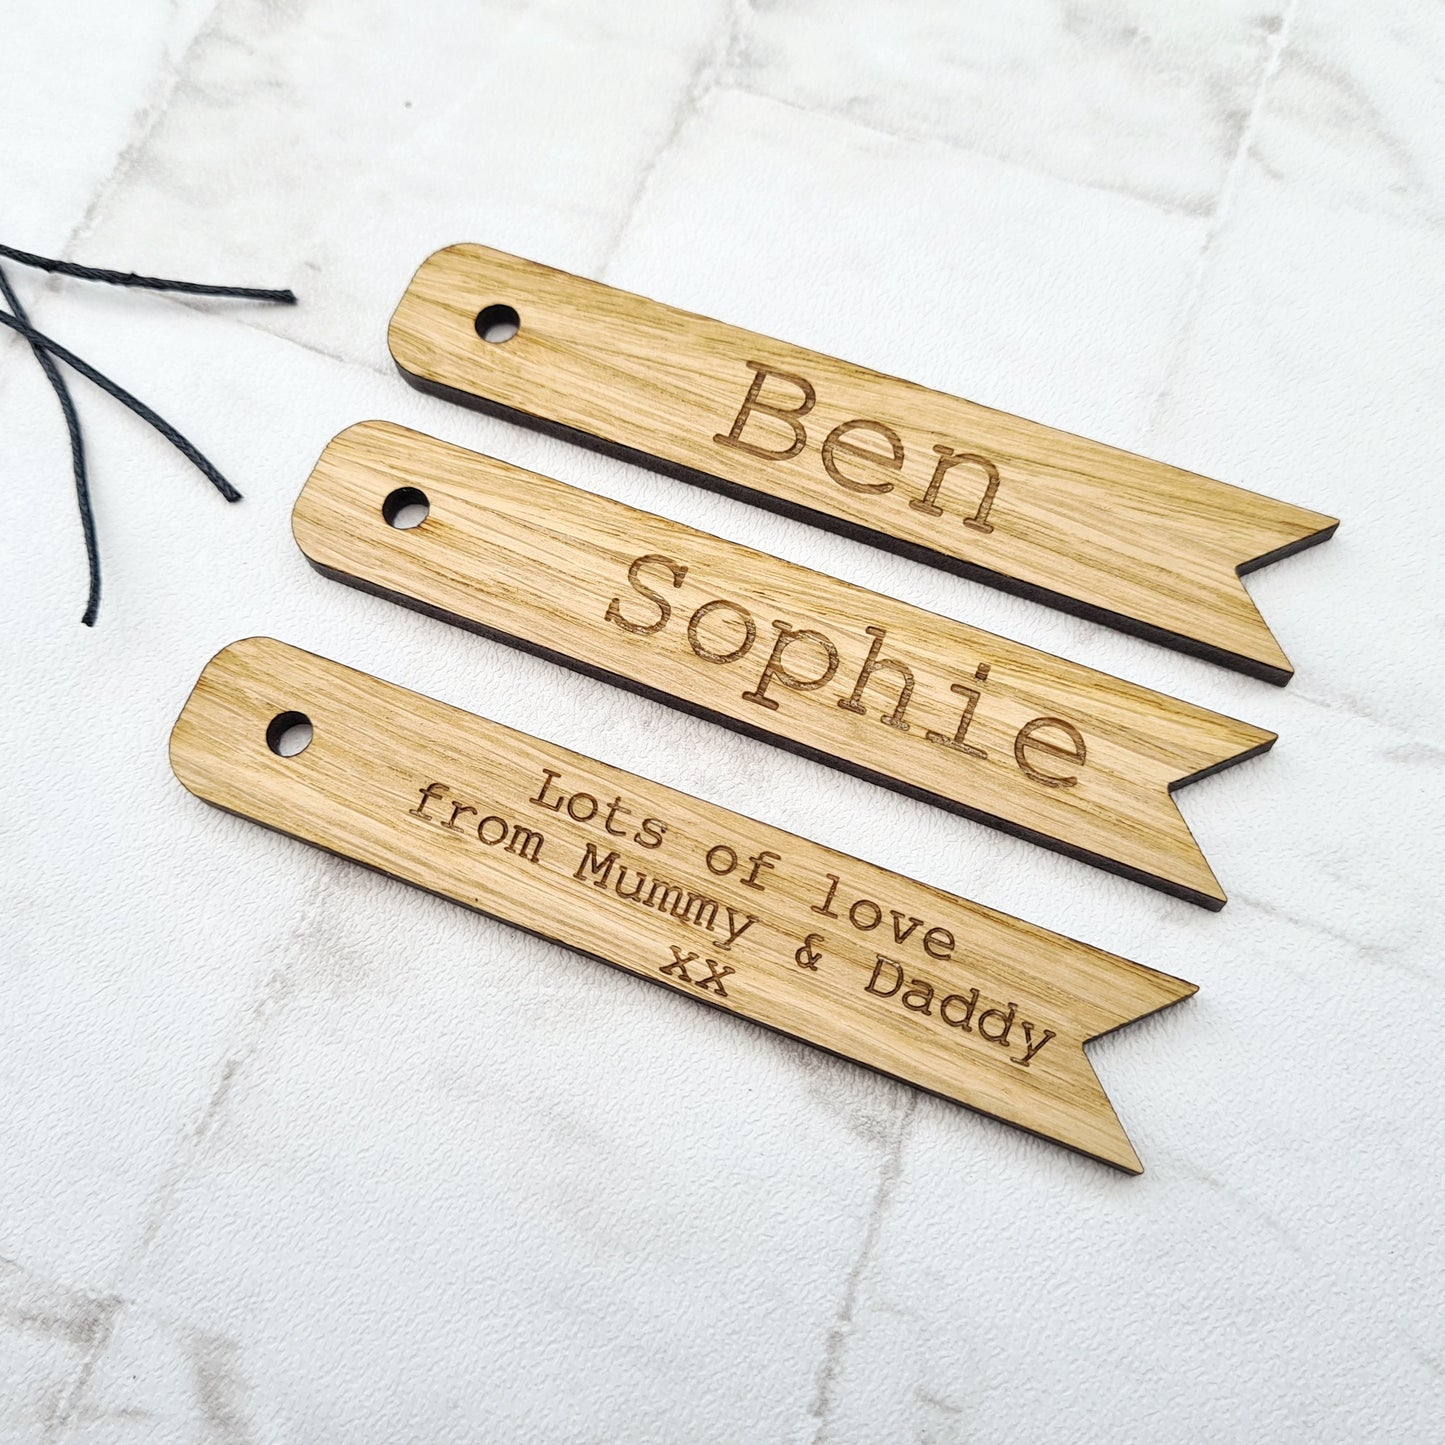 Personalised gift tags made from wood, engraved with custom names and attached with cotton string